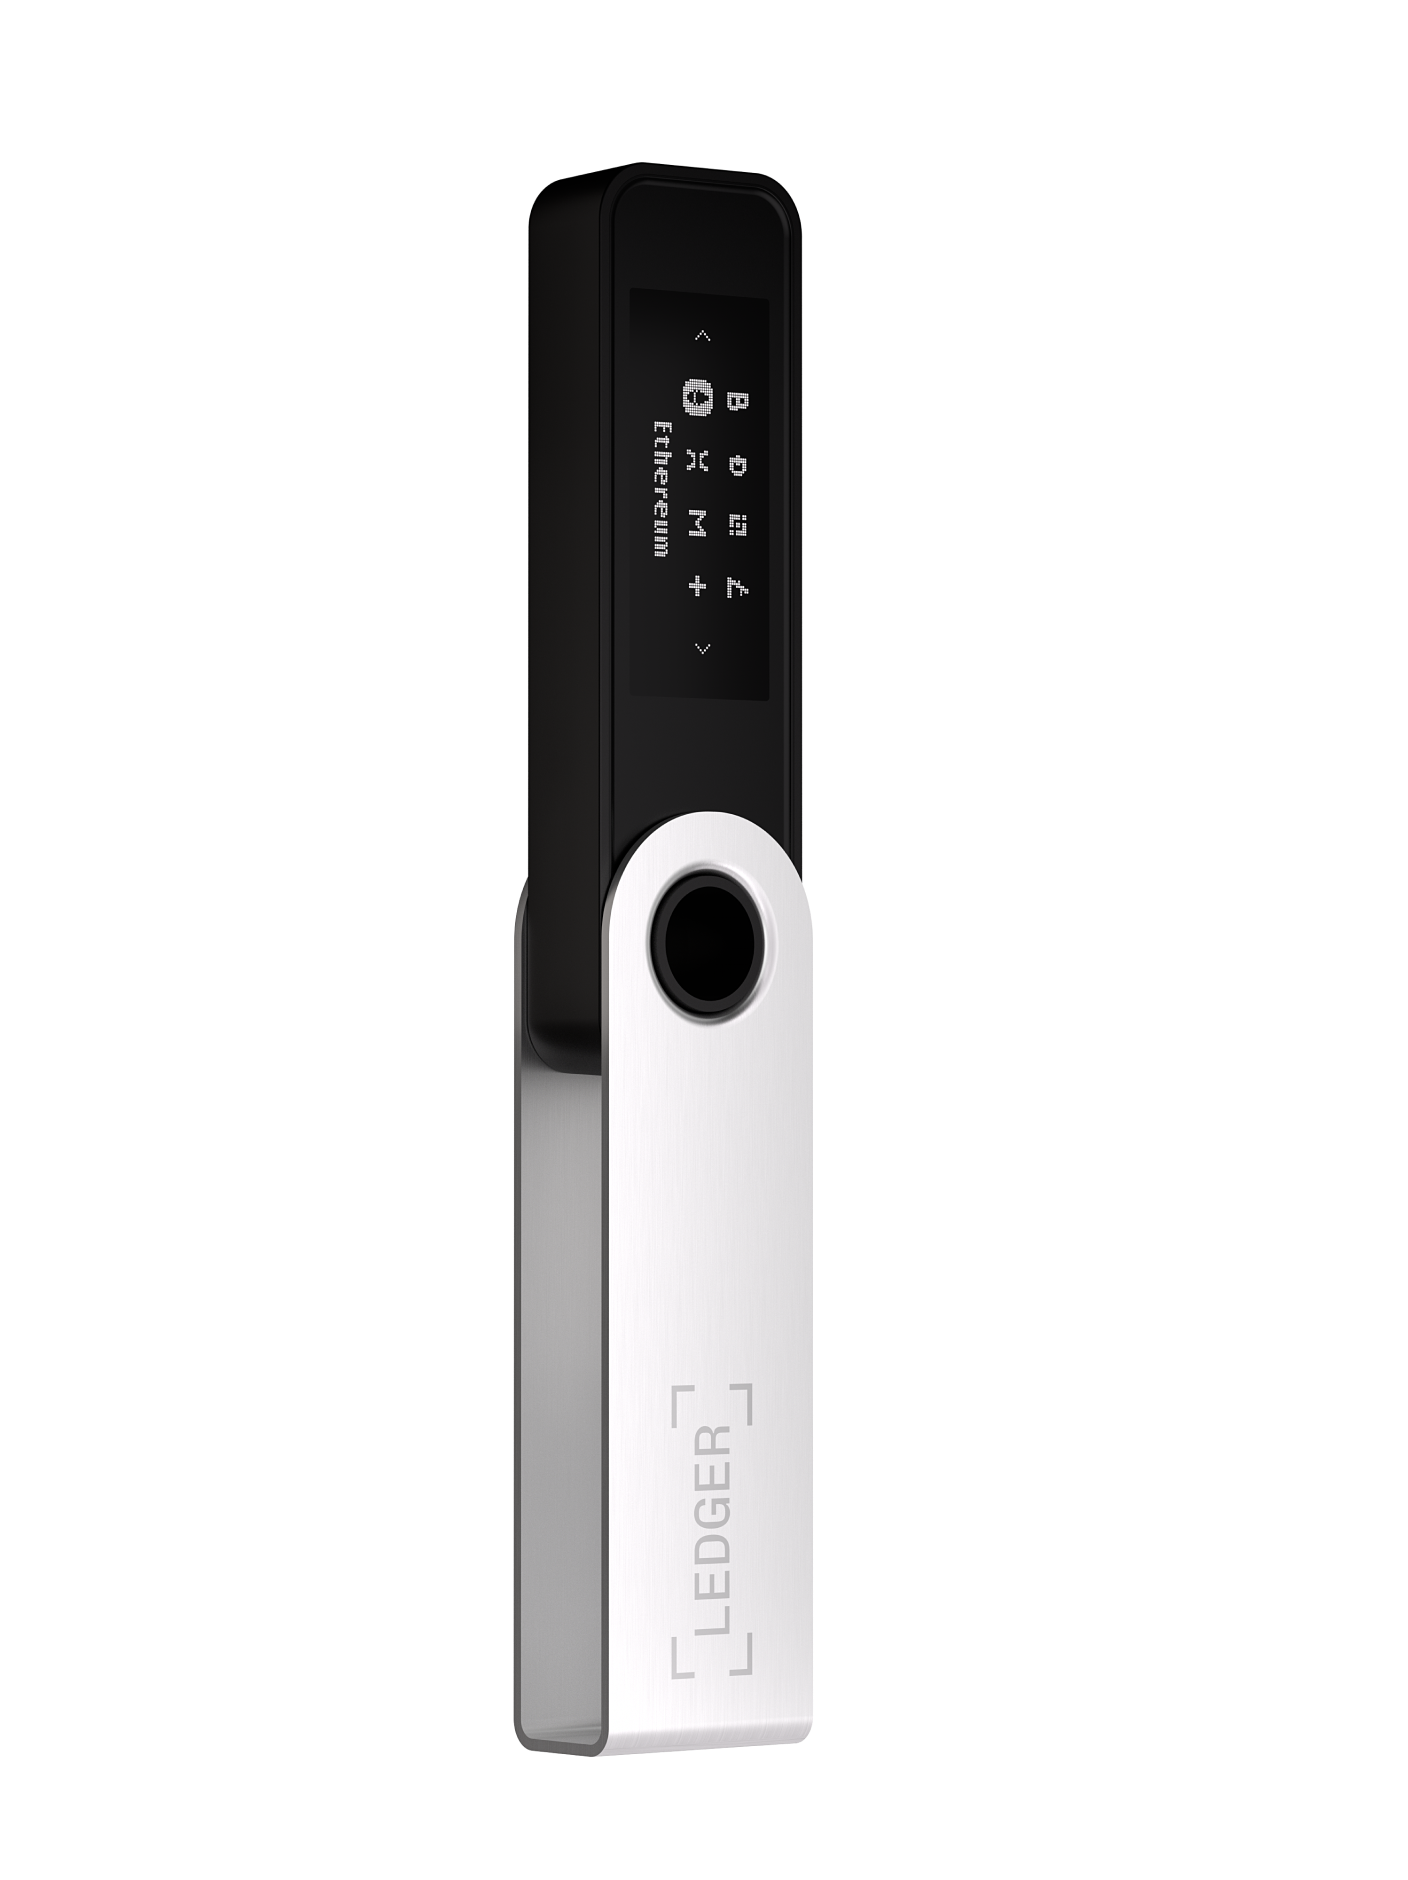 Ledger Nano S Plus cryptocurrency wallet features a bigger screen and more  memory » Gadget Flow